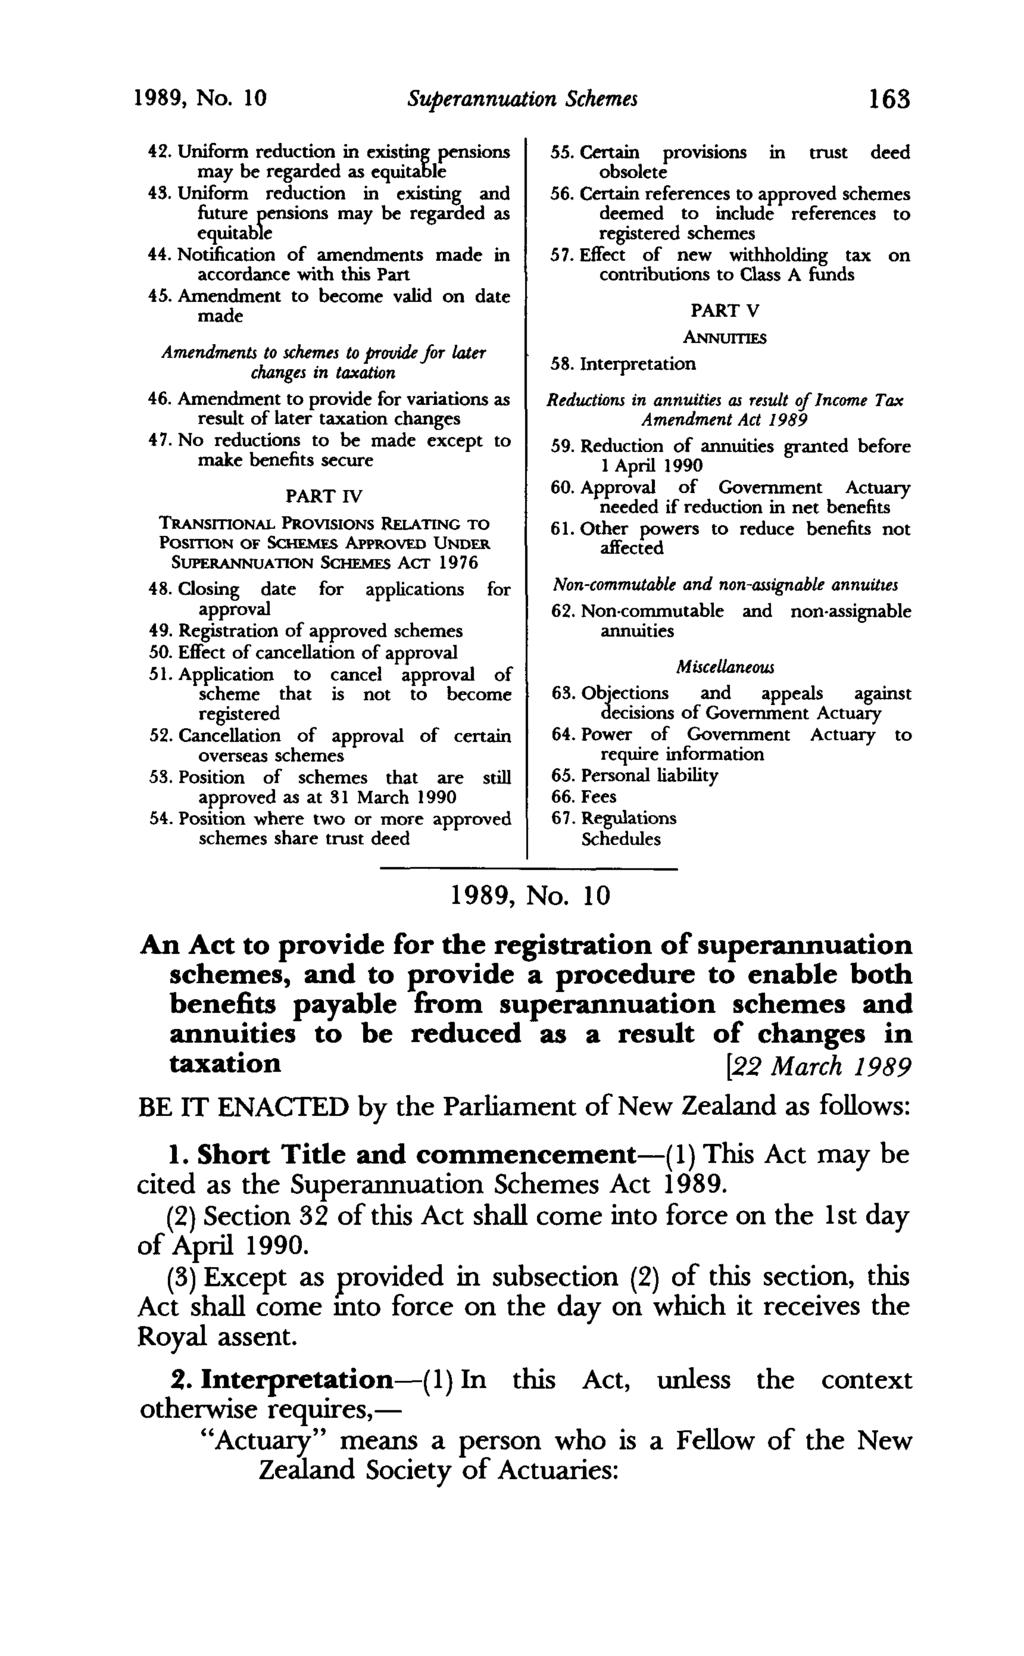 1989, No. 10 Superannuation Schemes 163 42. Uniform reduction in existing pensions may be regarded as equitable 43. Uniform reduction in existing and future pensions may be regarded as equitable 44.